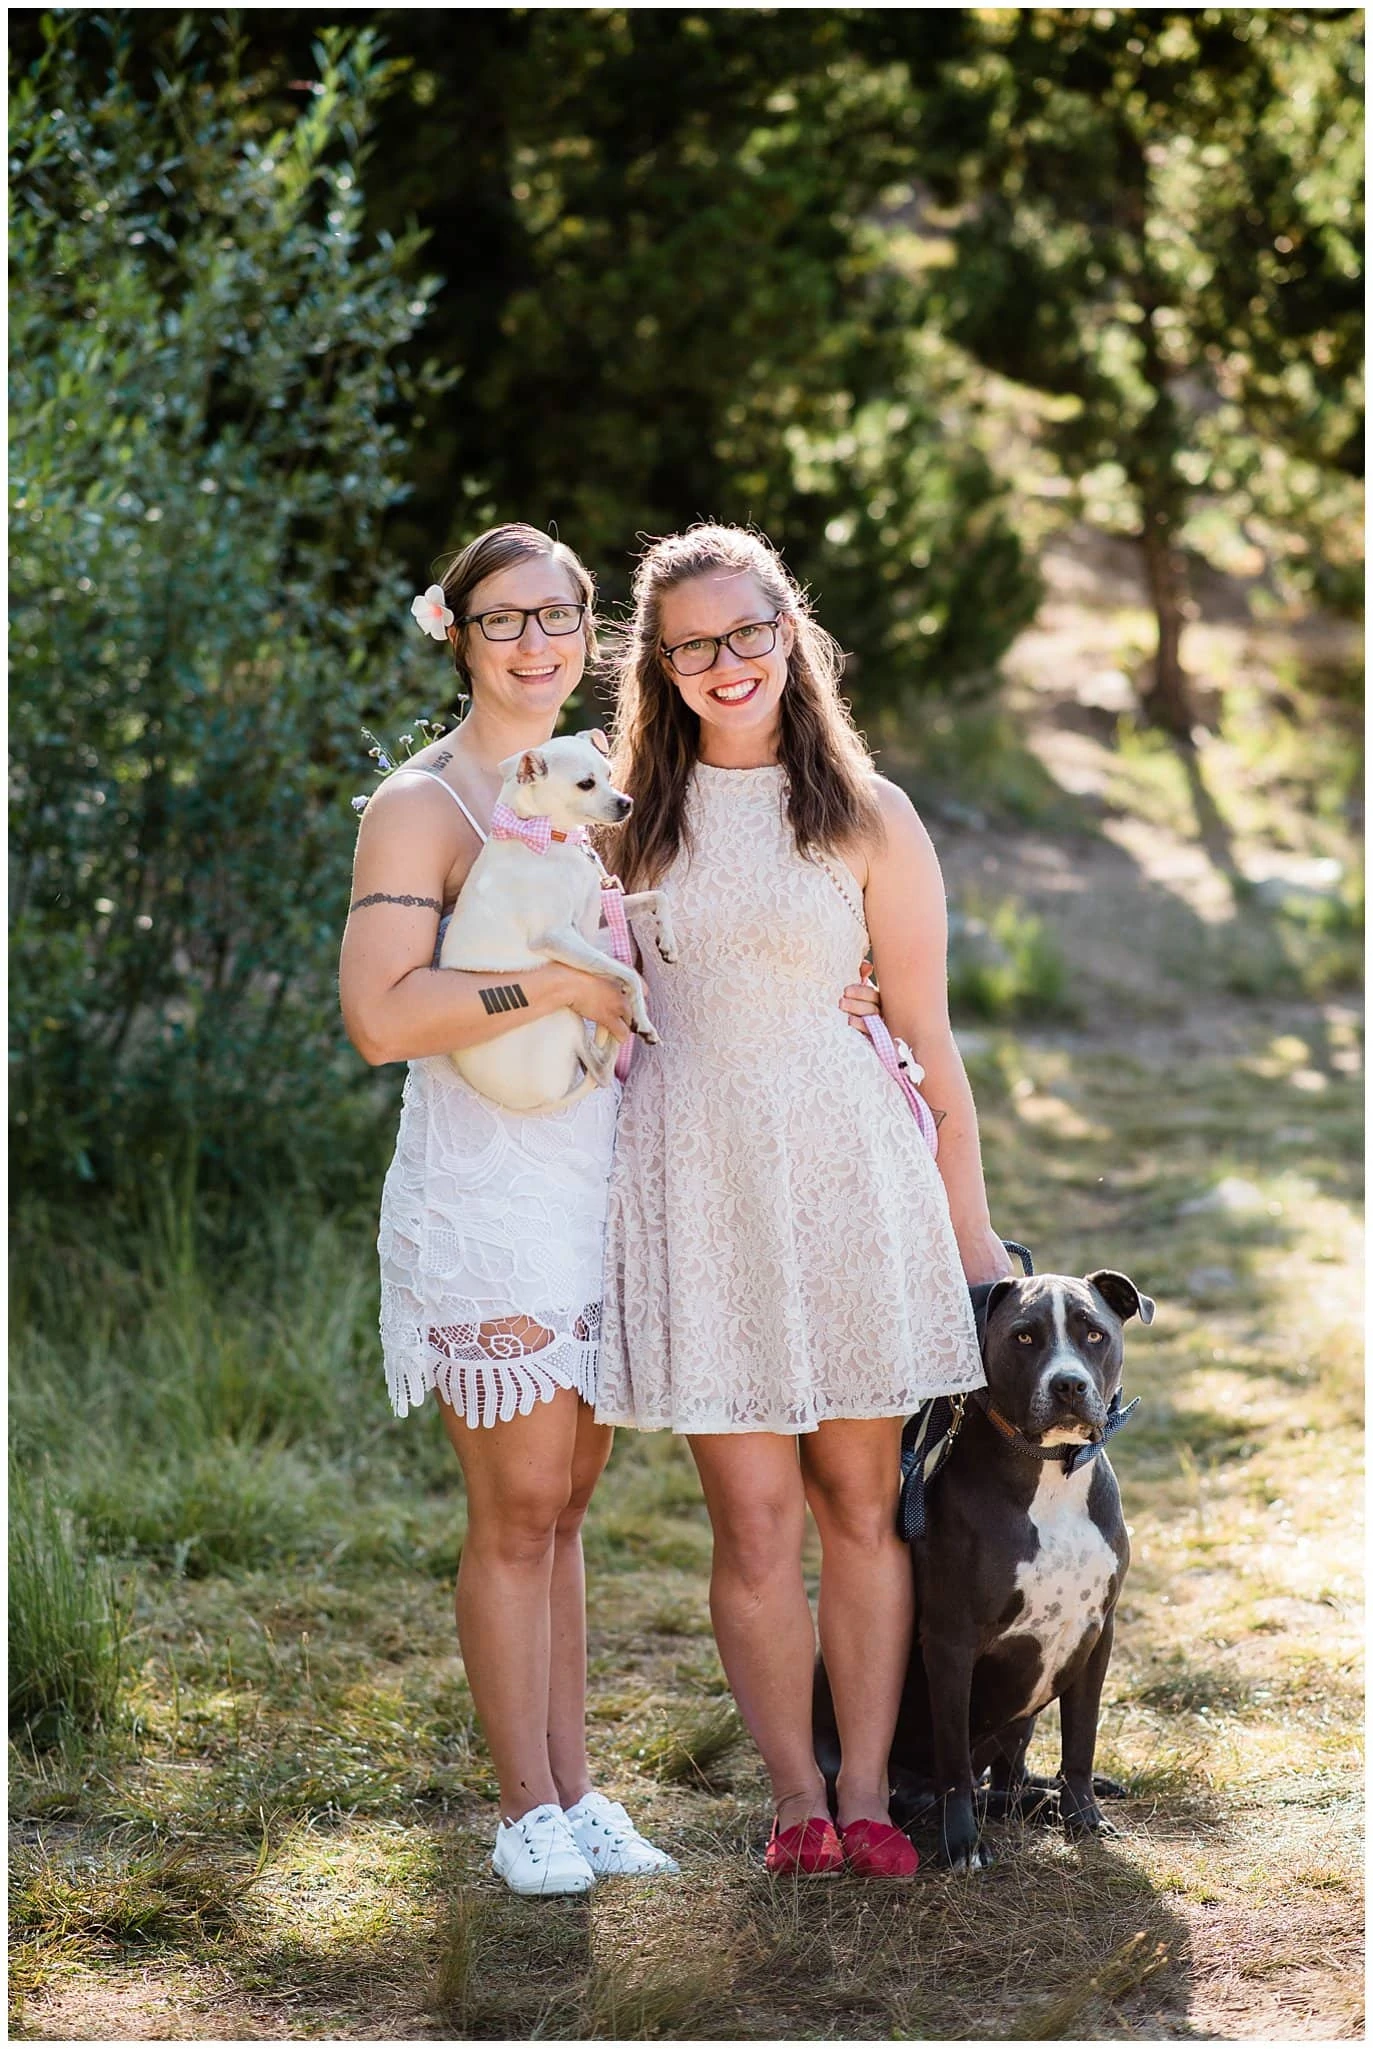 family photo with dogs at wedding photo